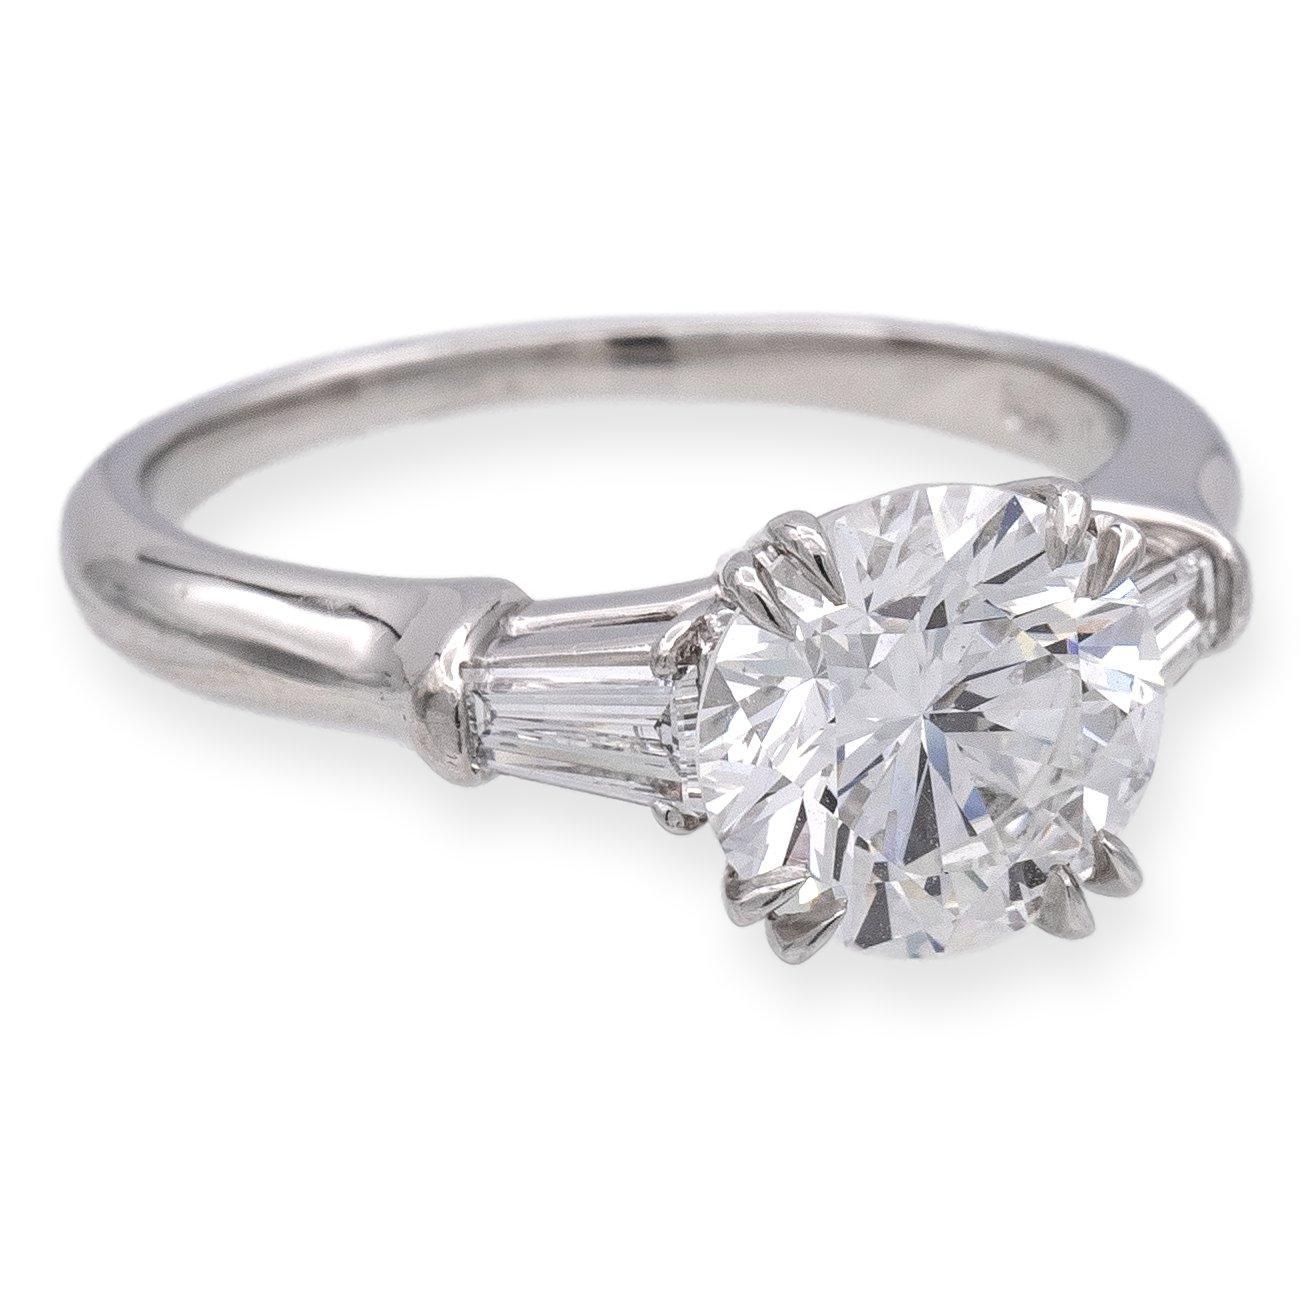 Harry Winston Solitaire Diamond Engagement ring from the classic collection finely crafted in platinum with a fine GIA Certified round center diamond set in double claw prongs weighing 1.77 carats, F color VS1 clarity . This Harry Winston ring